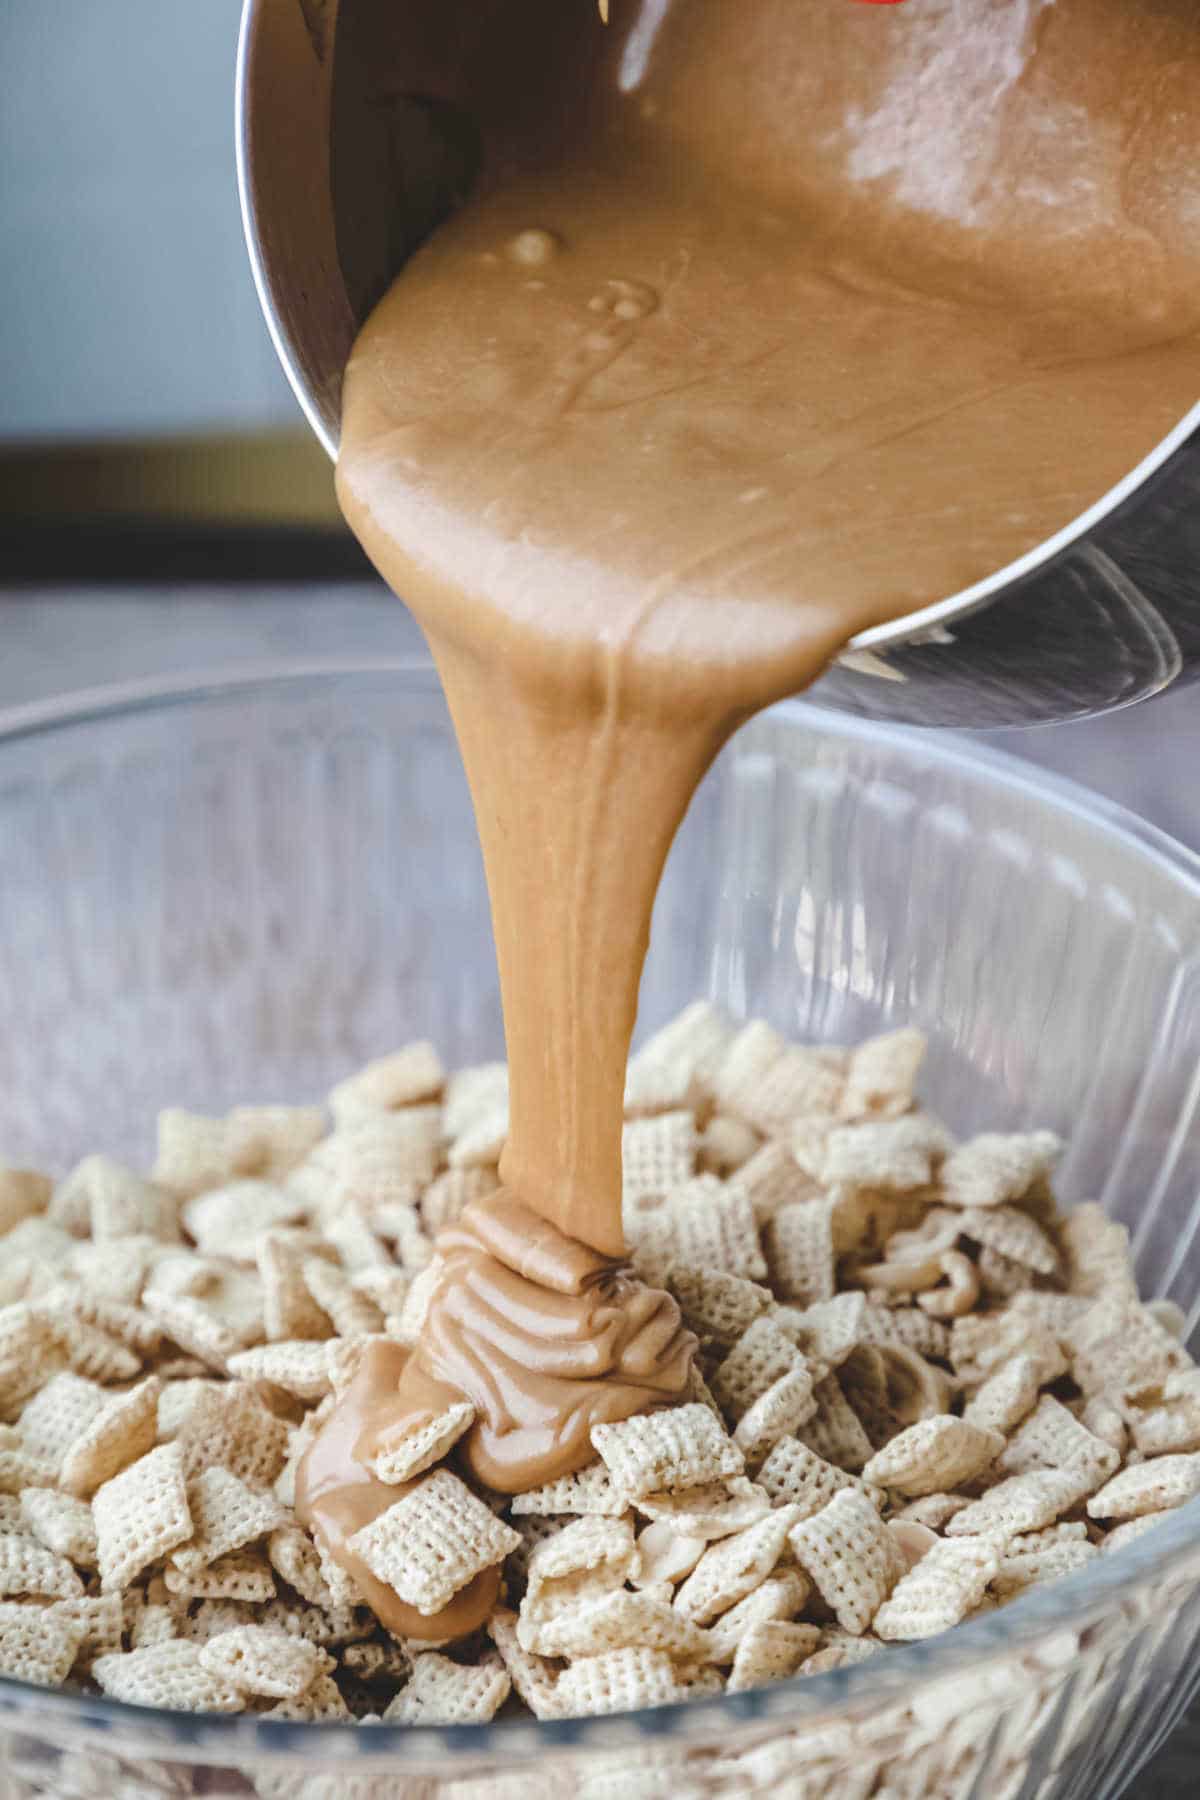 Peanut butter sauce pouring onto Chex cereal.